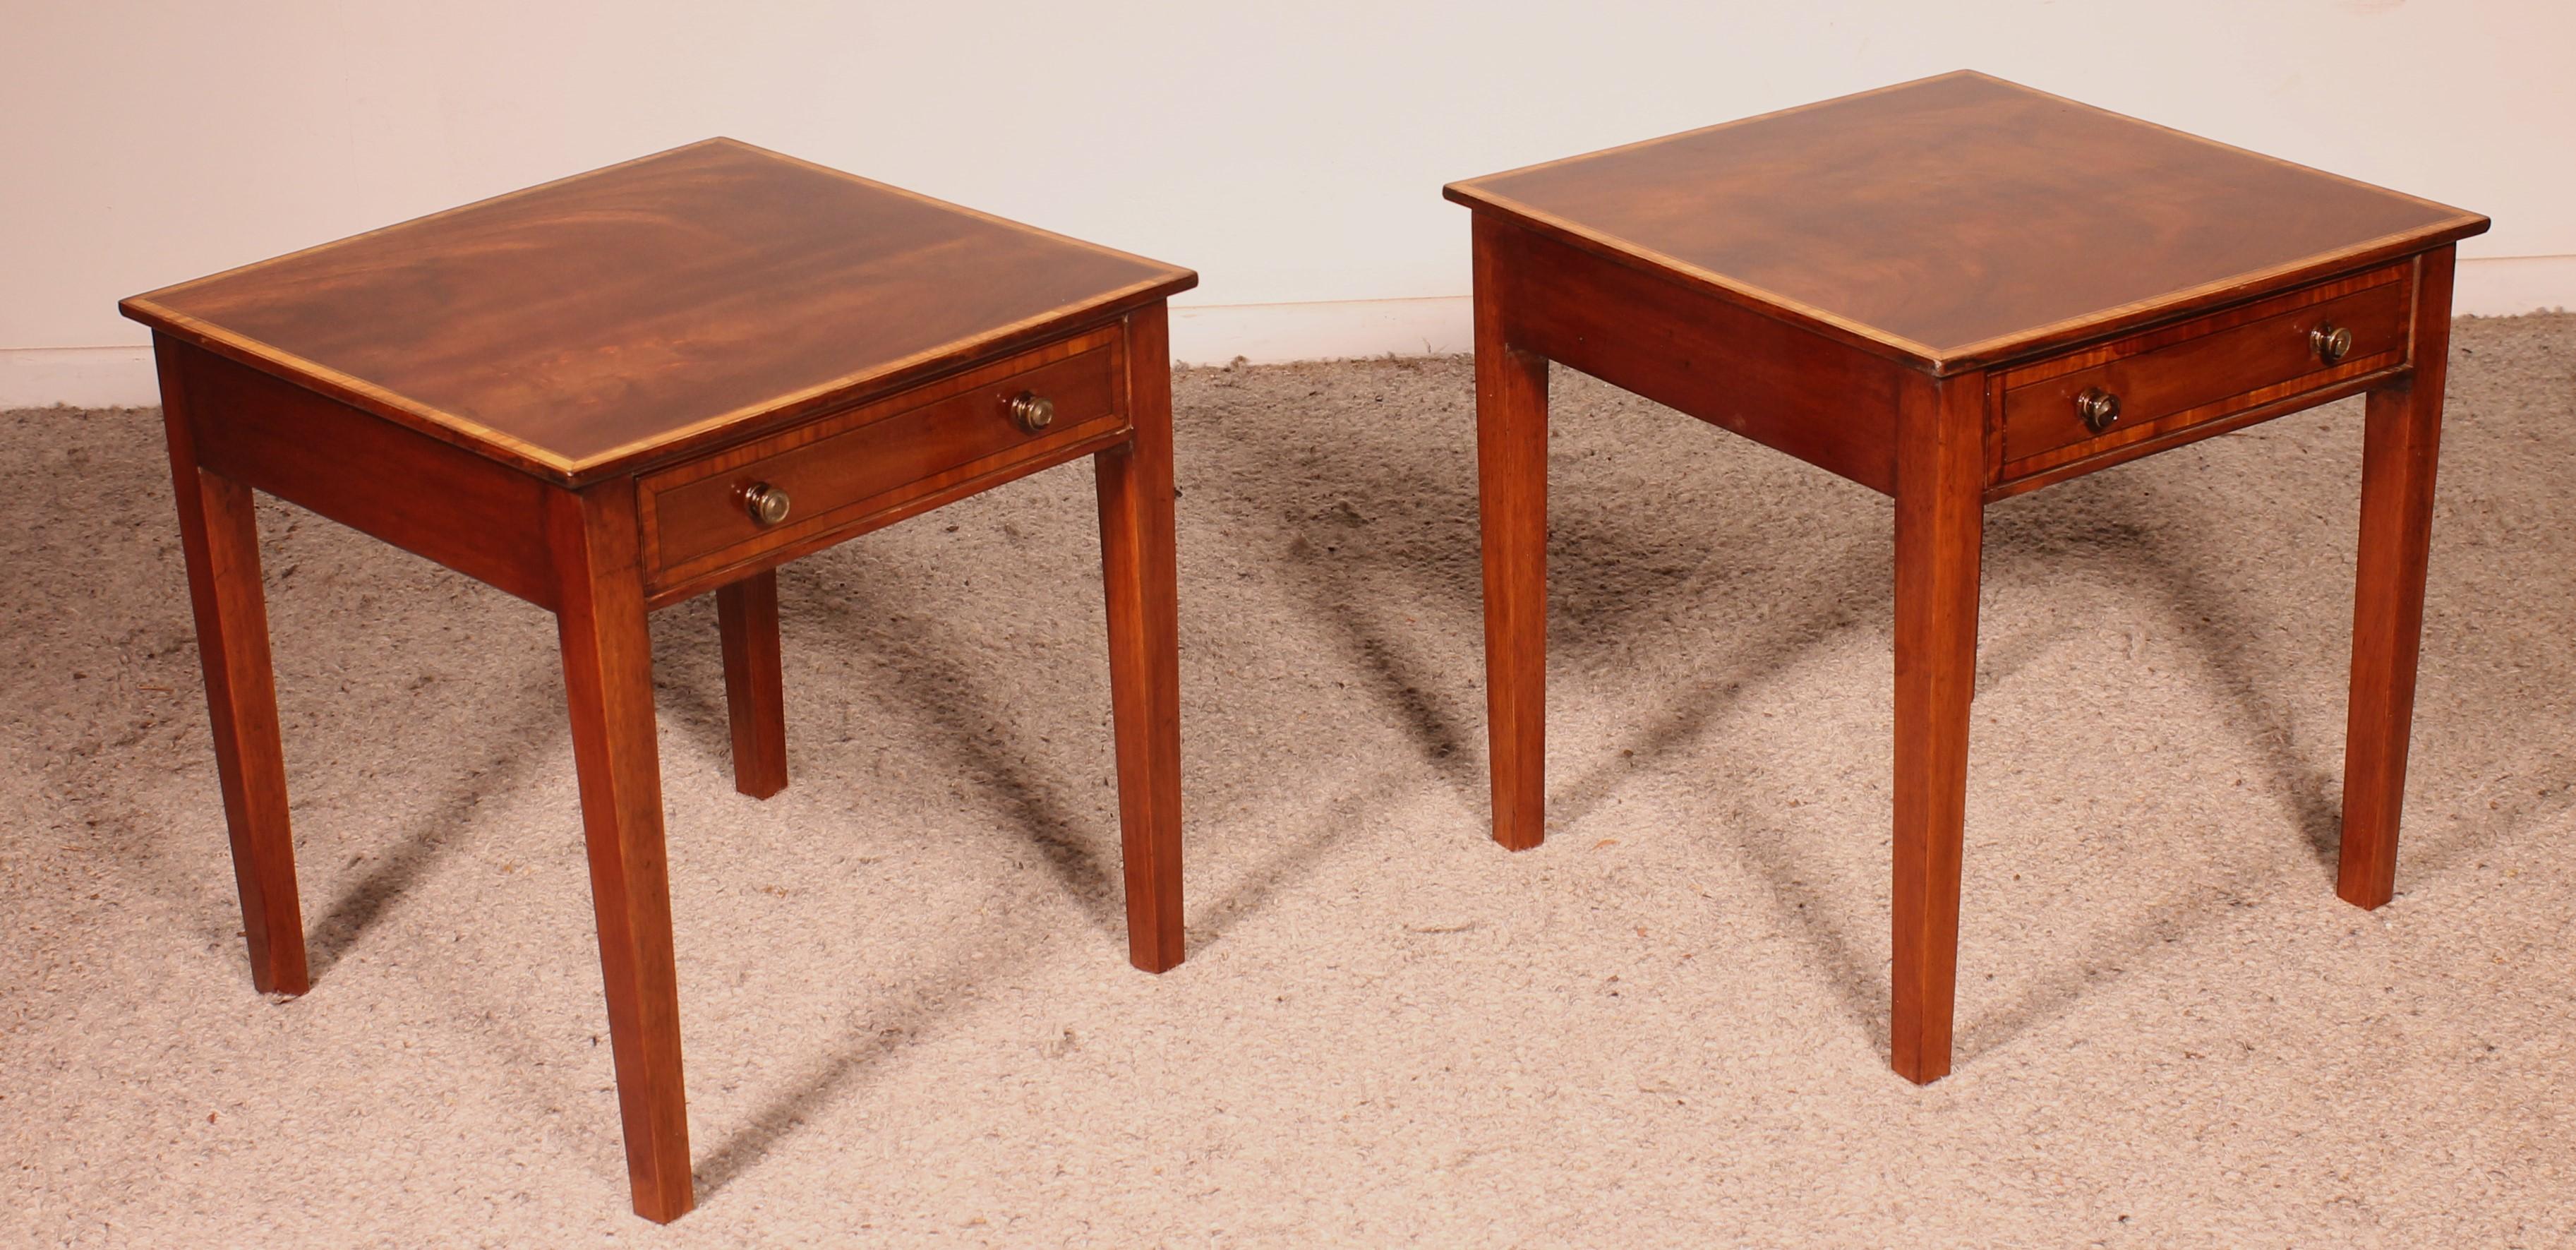 Pair Of Mahogany Bedside Tables From The Early 19th Century For Sale 8